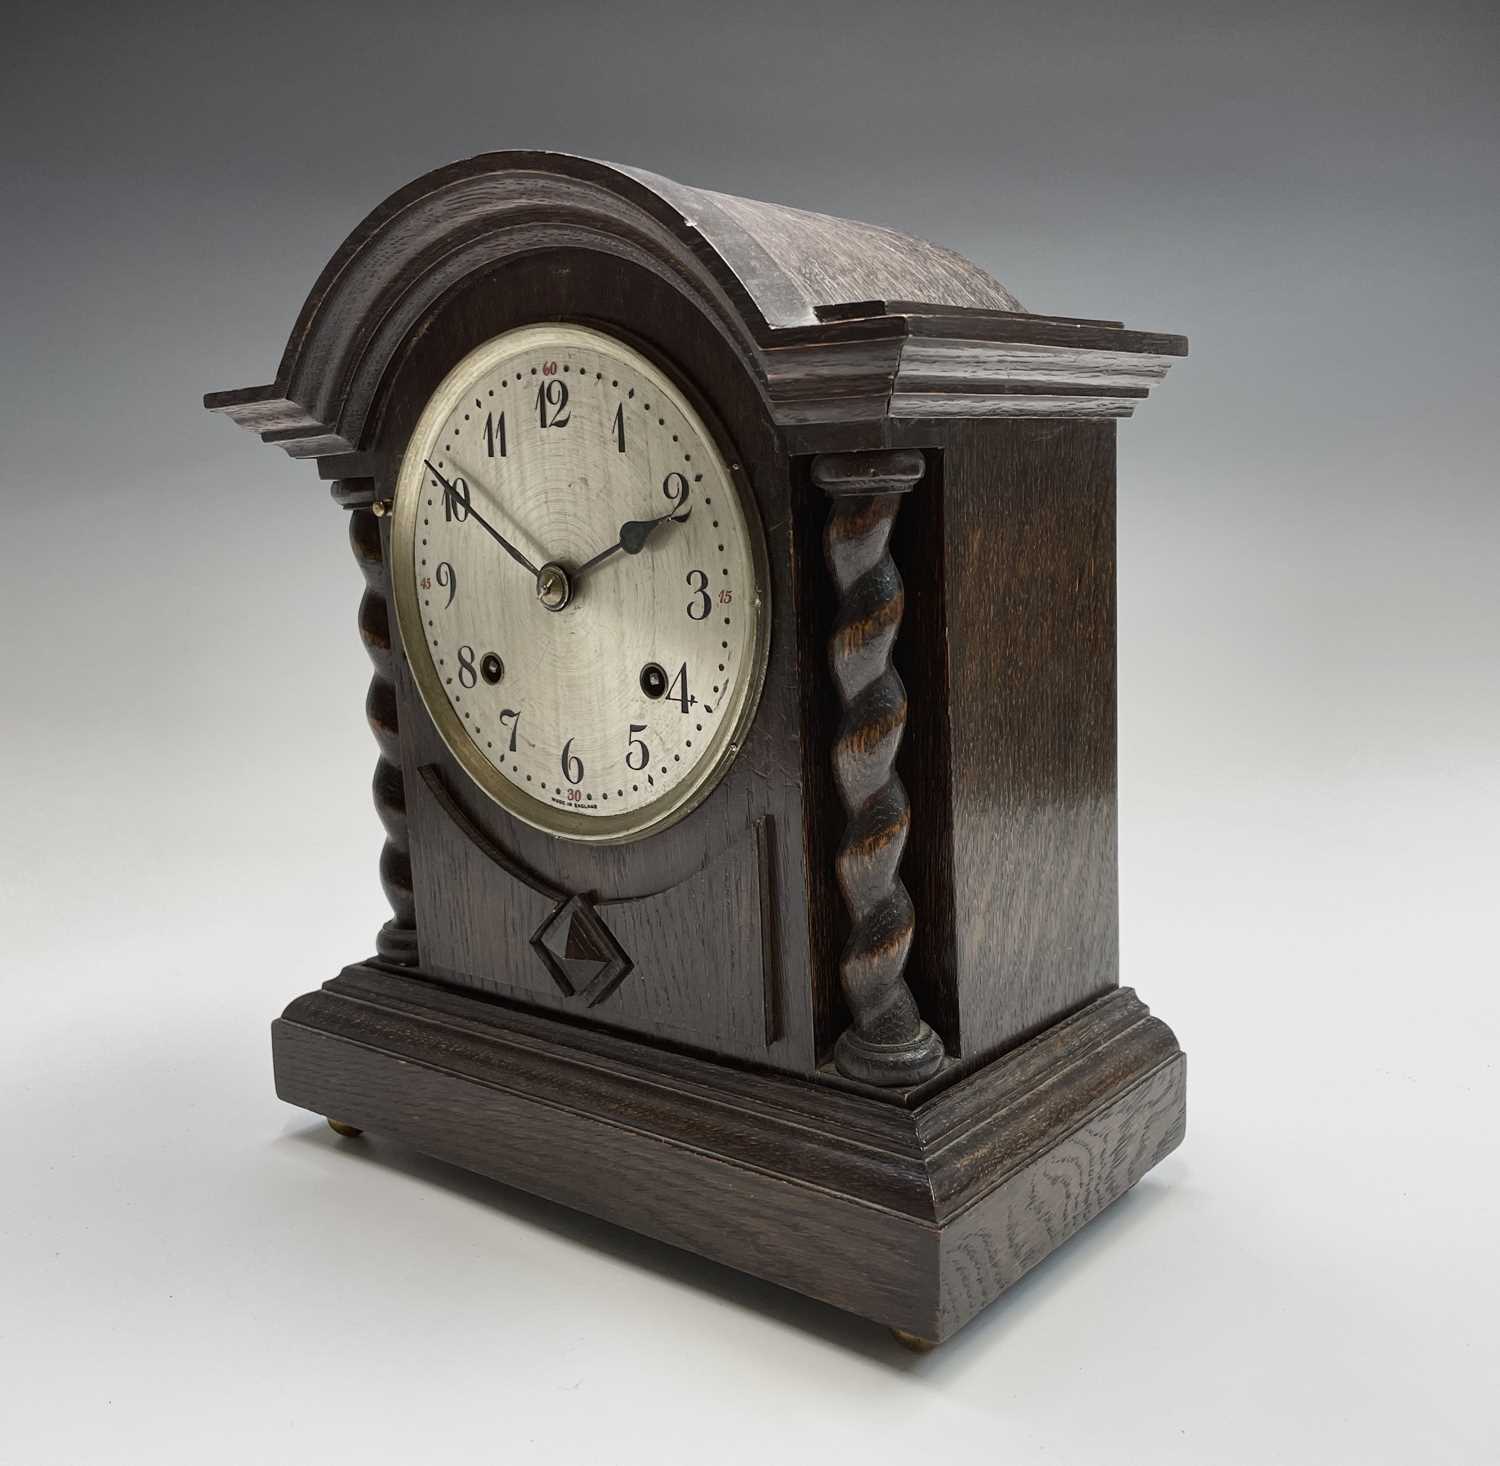 An oak cased mantel clock, with twist side supports, British Jerome movement, height 30cm. - Image 6 of 6